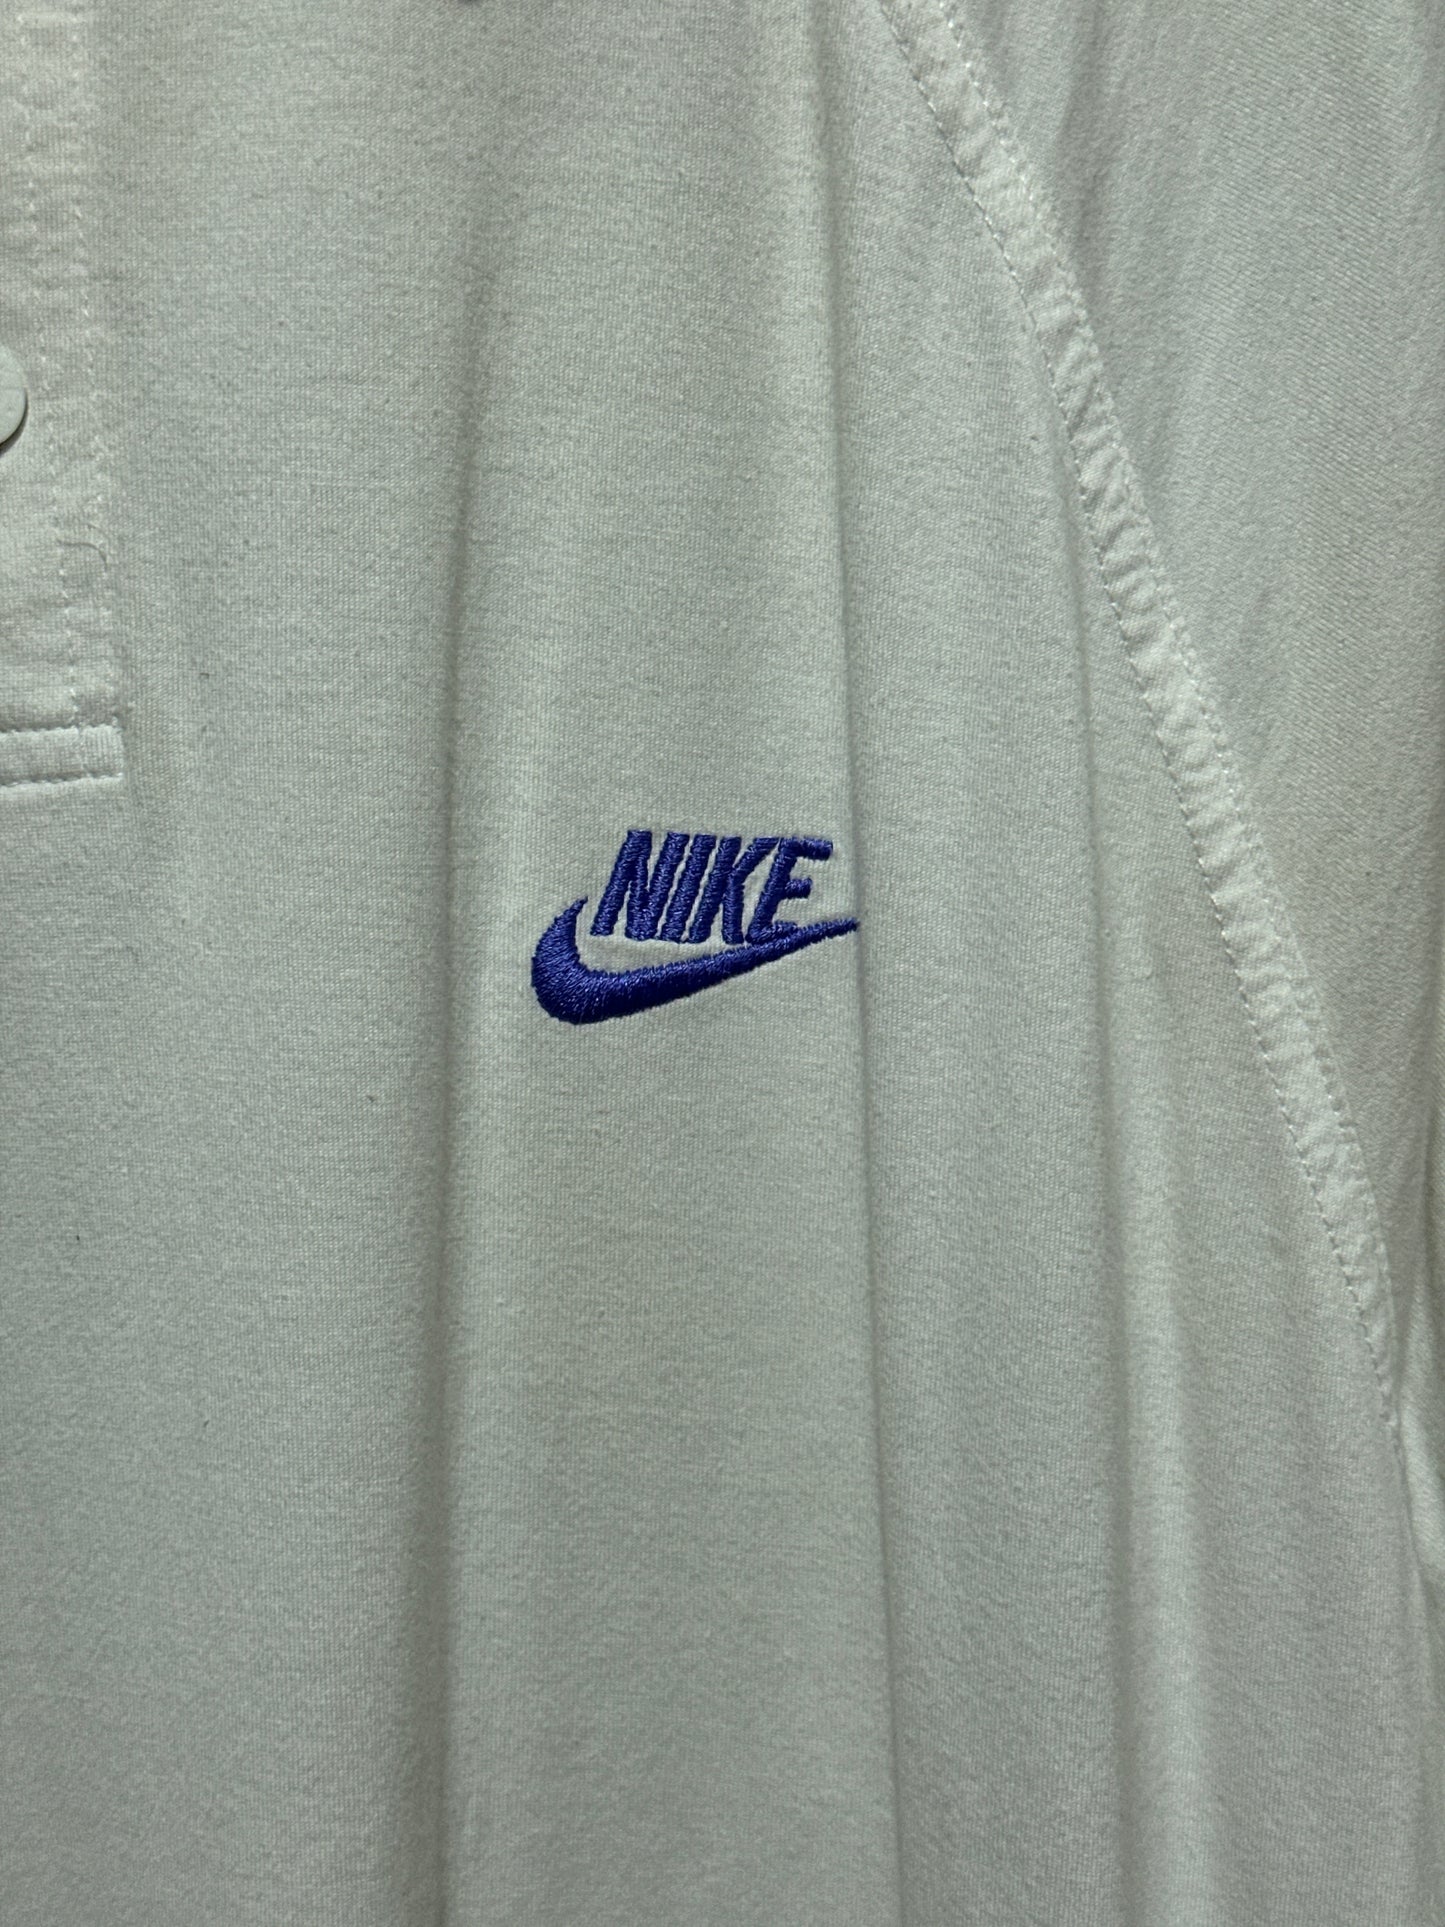 Vintage 90s Nike Challenge Court Andre Agassi Polo Shirt Large